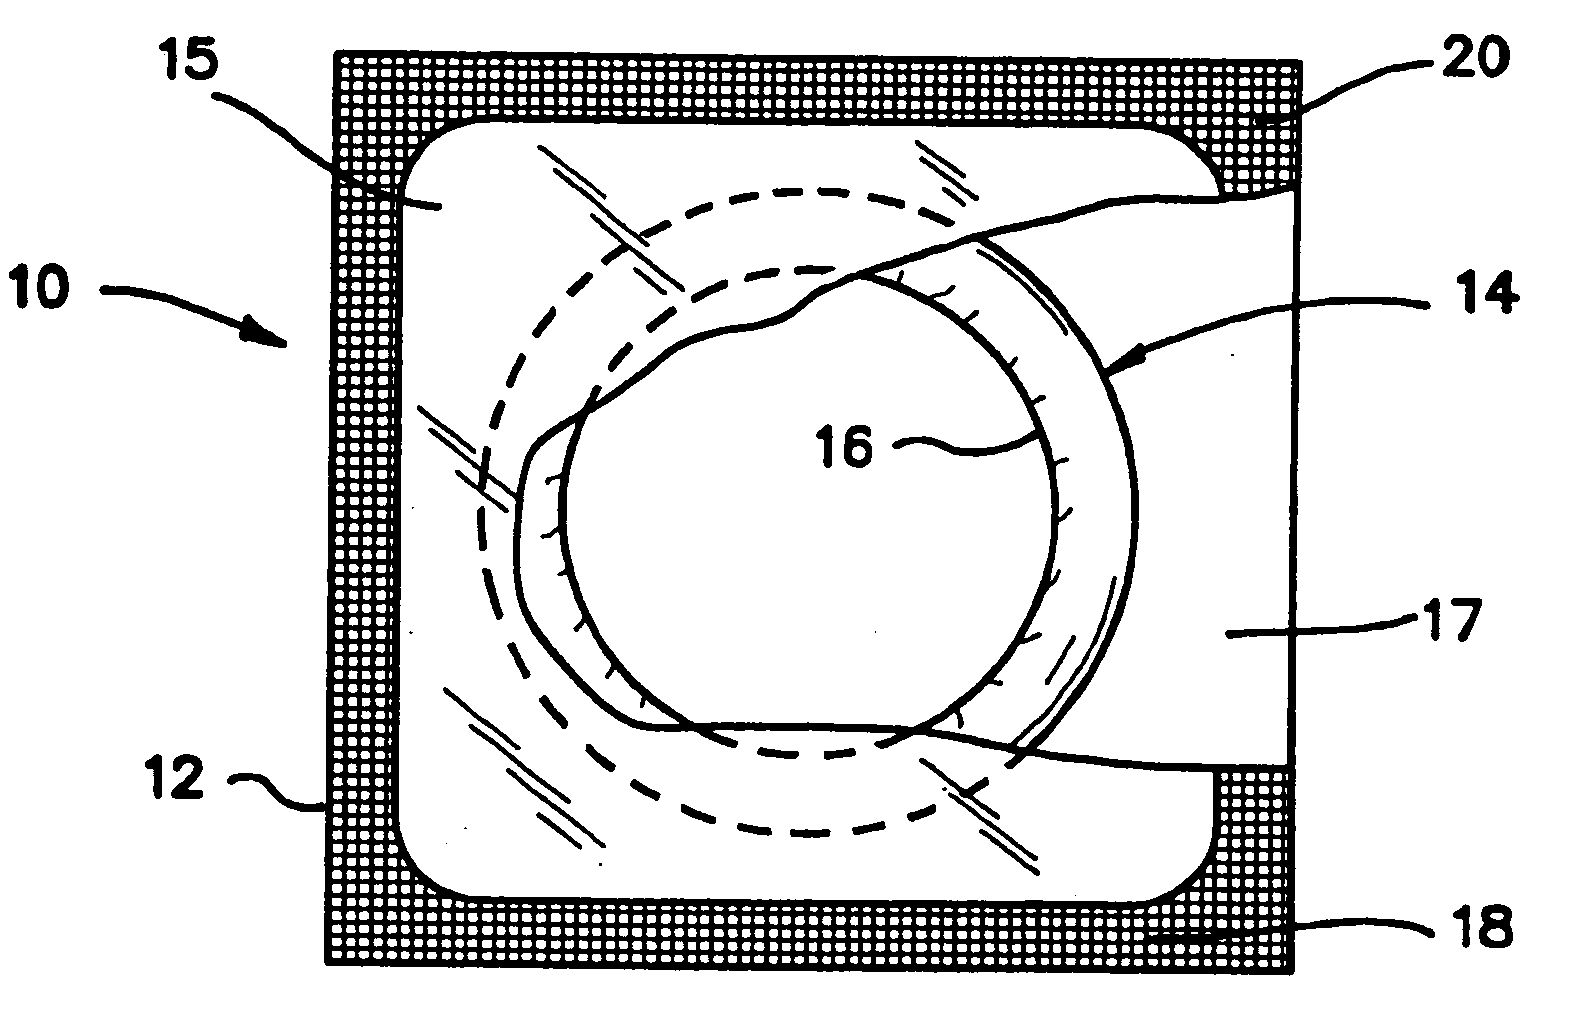 Clear, washable lubricant compositions, and methods of making same